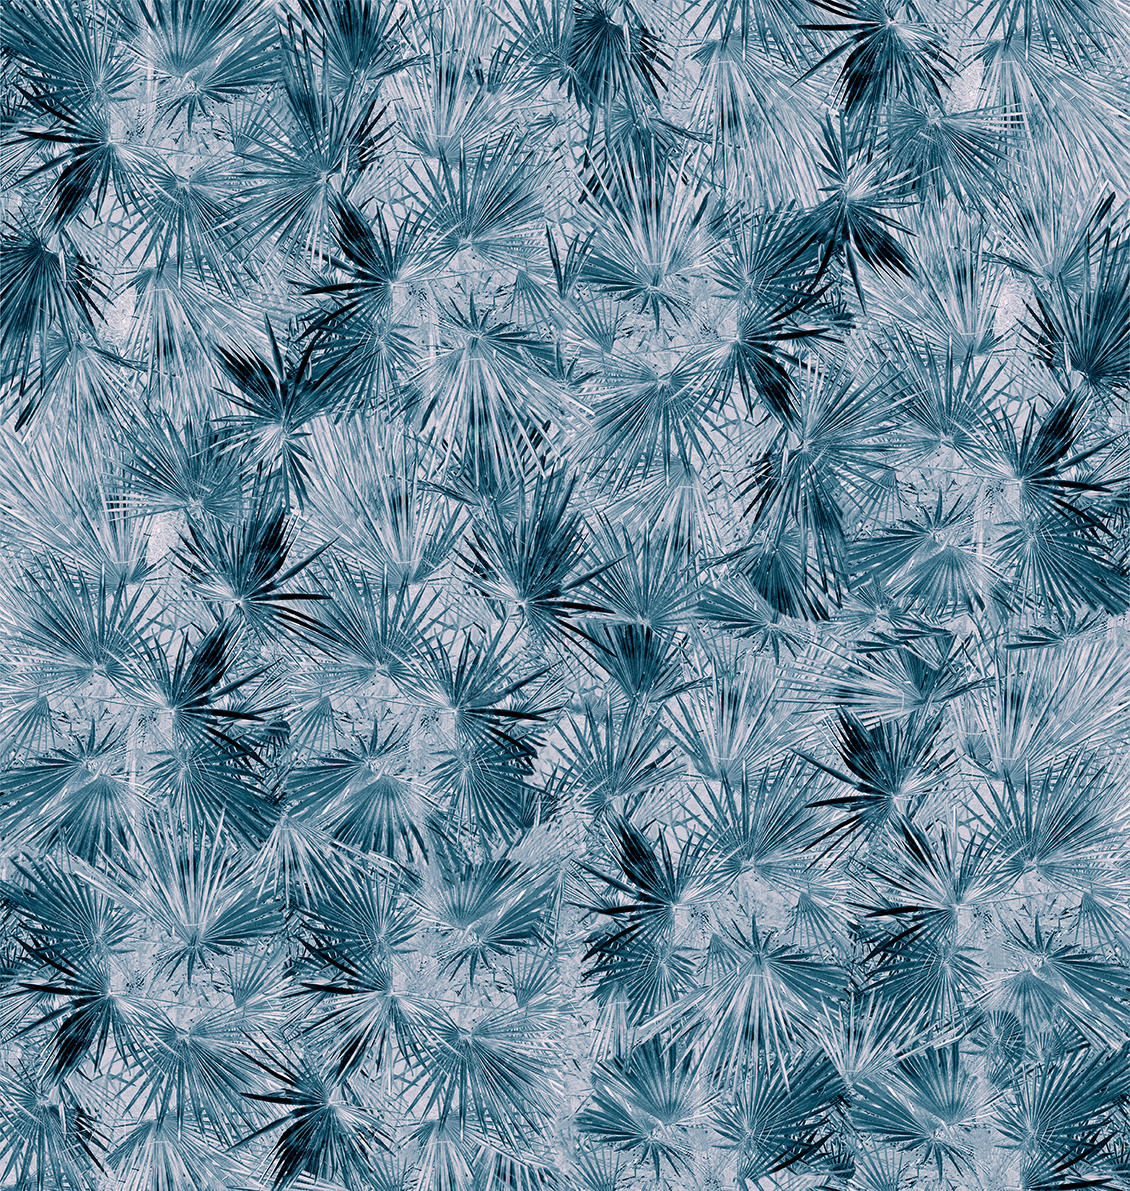 Exotic wallpaper with palm leaf design in various shades of blue